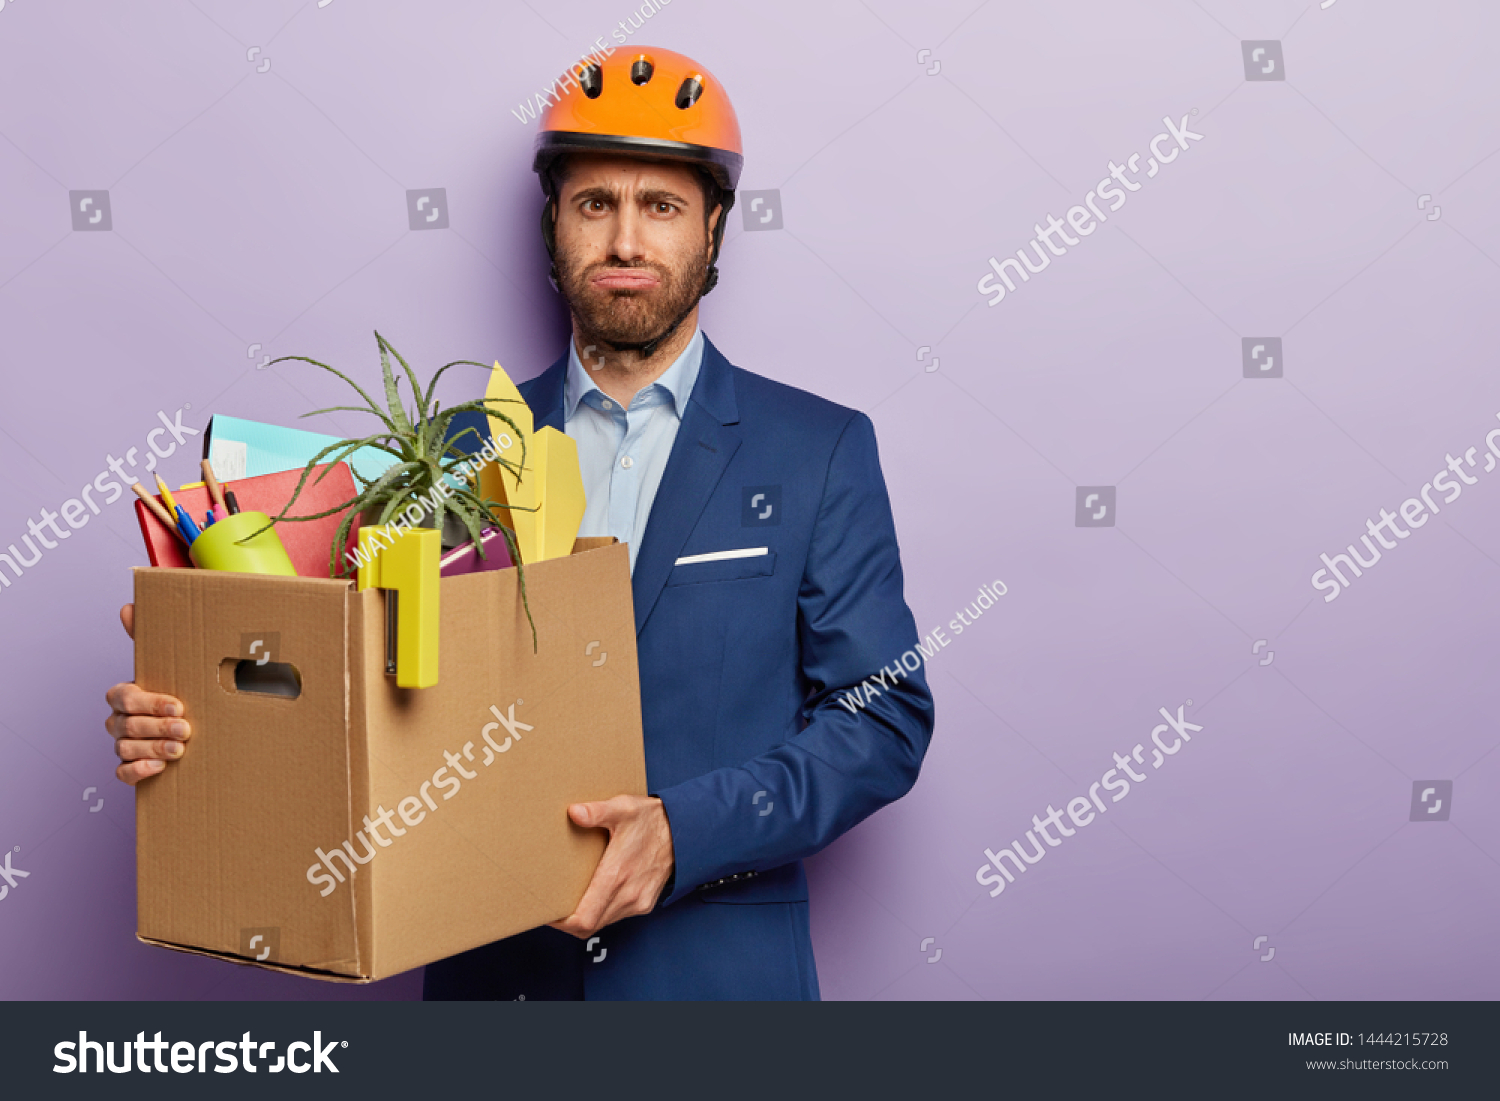 Fatigue male worker carries heavy cardboard box with office stuff, moves in new cabinet, wears helmet and suit, has dissatisfied tired facial expression, busy carrying paper container, stands indoor #1444215728